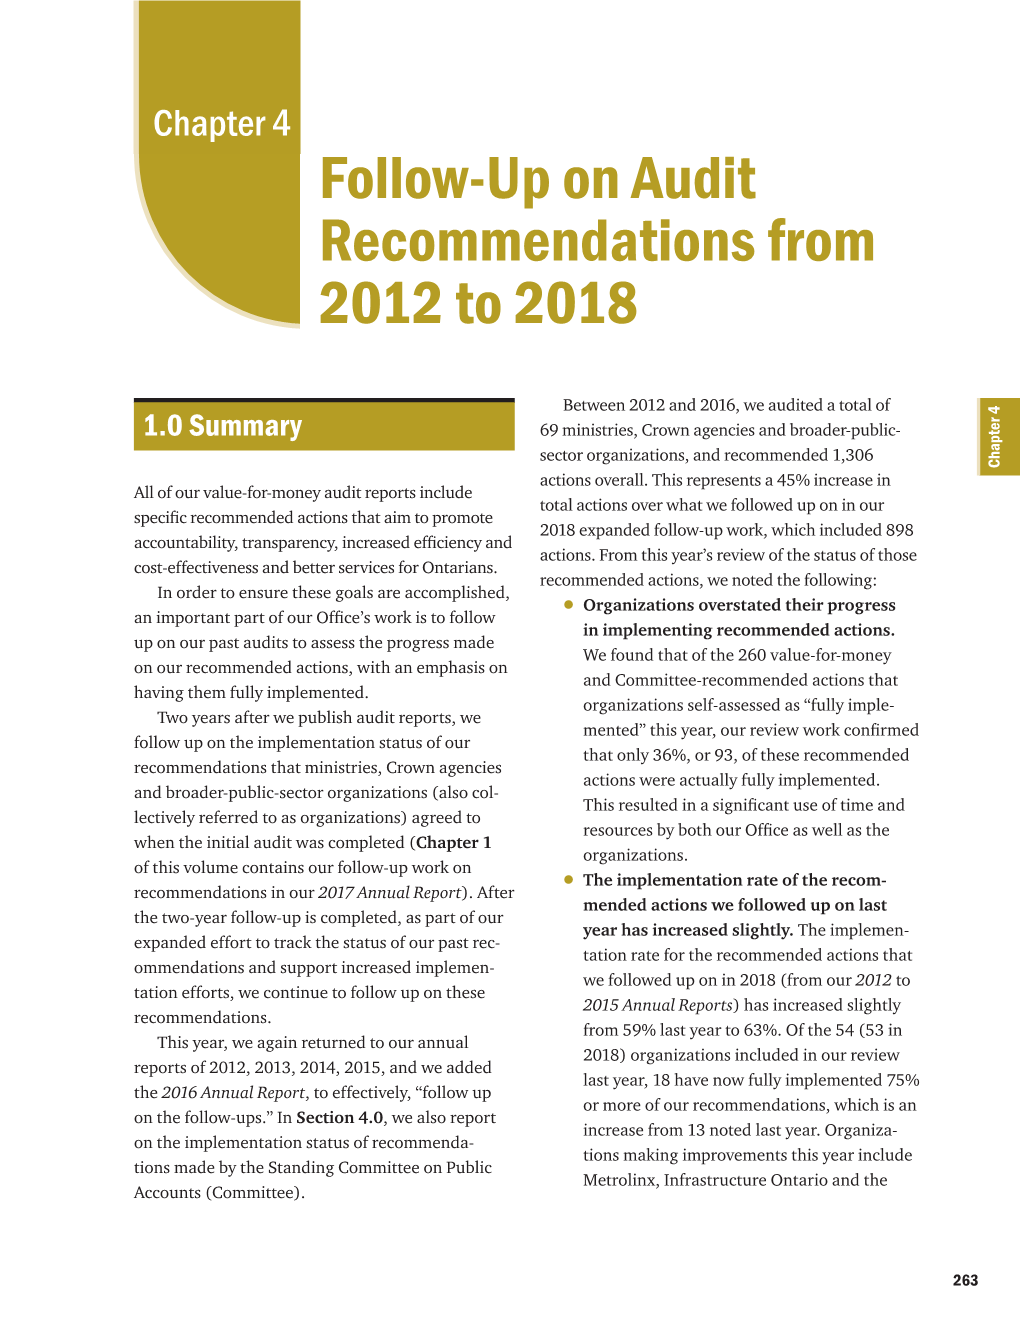 Follow-Up on Audit Recommendations from 2012 to 2018 265